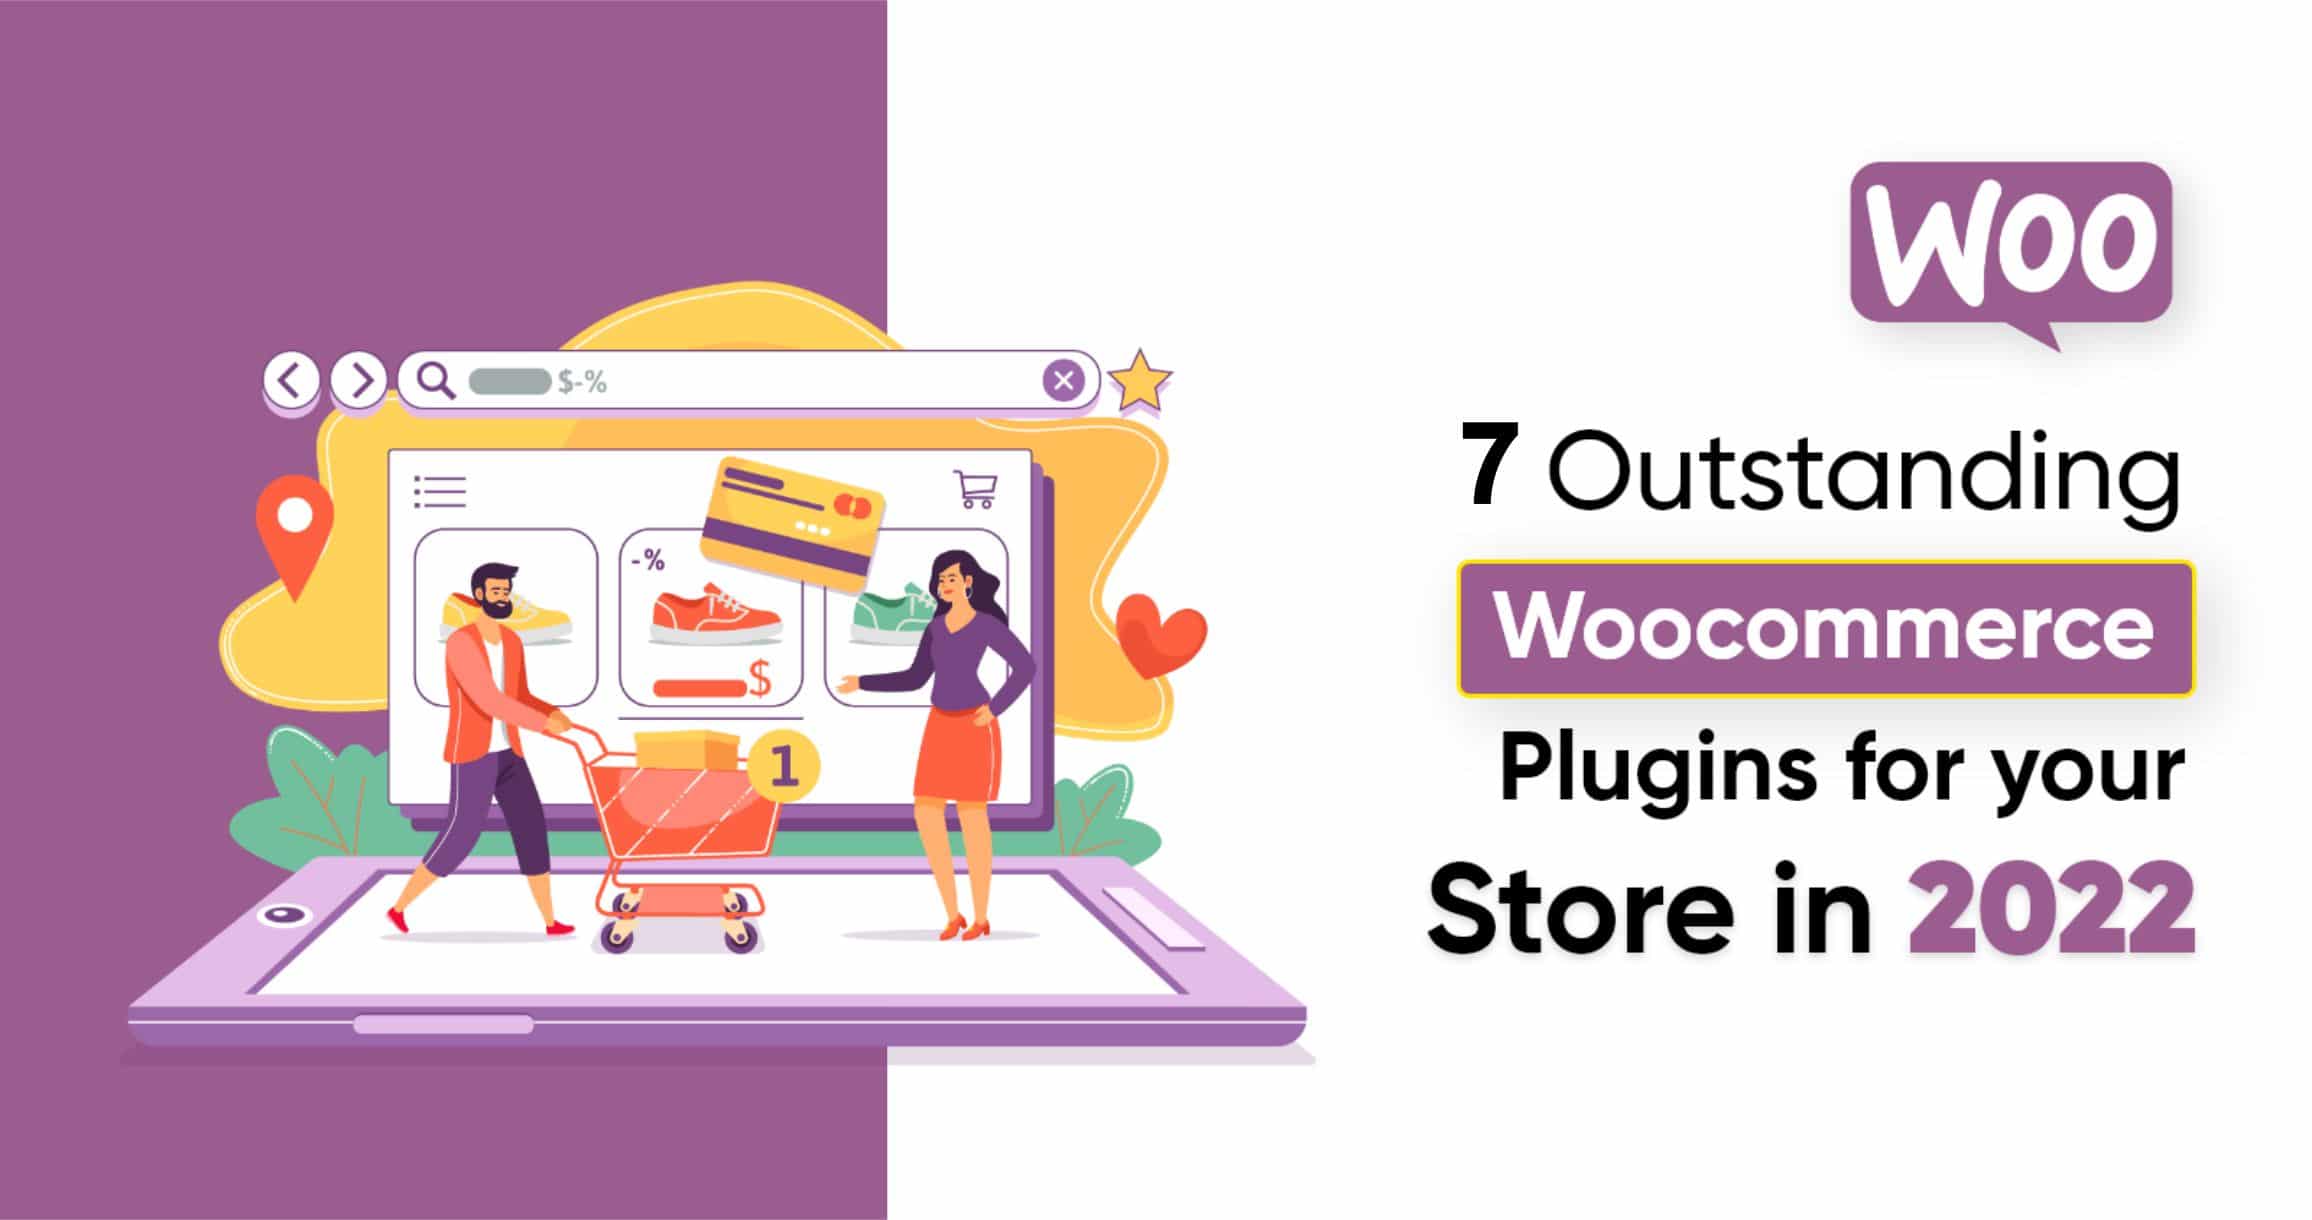 7 Outstanding WooCommerce Plugins for Your Store in 2022